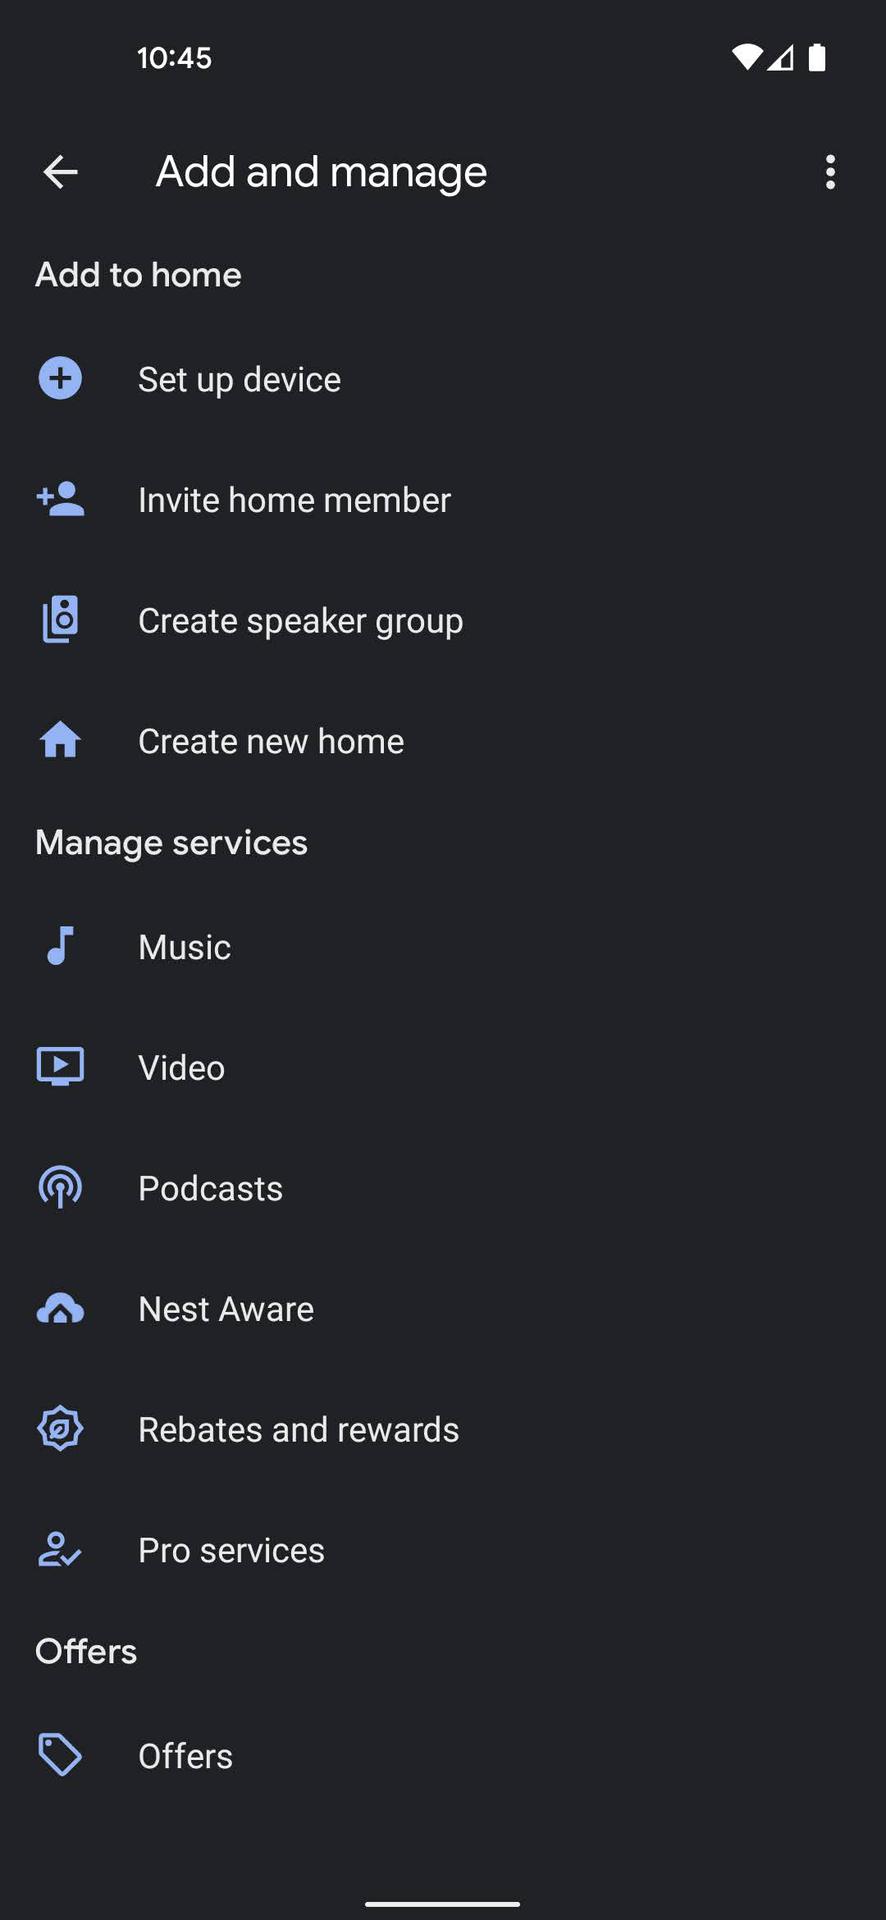 How to add devices to Google Home 2